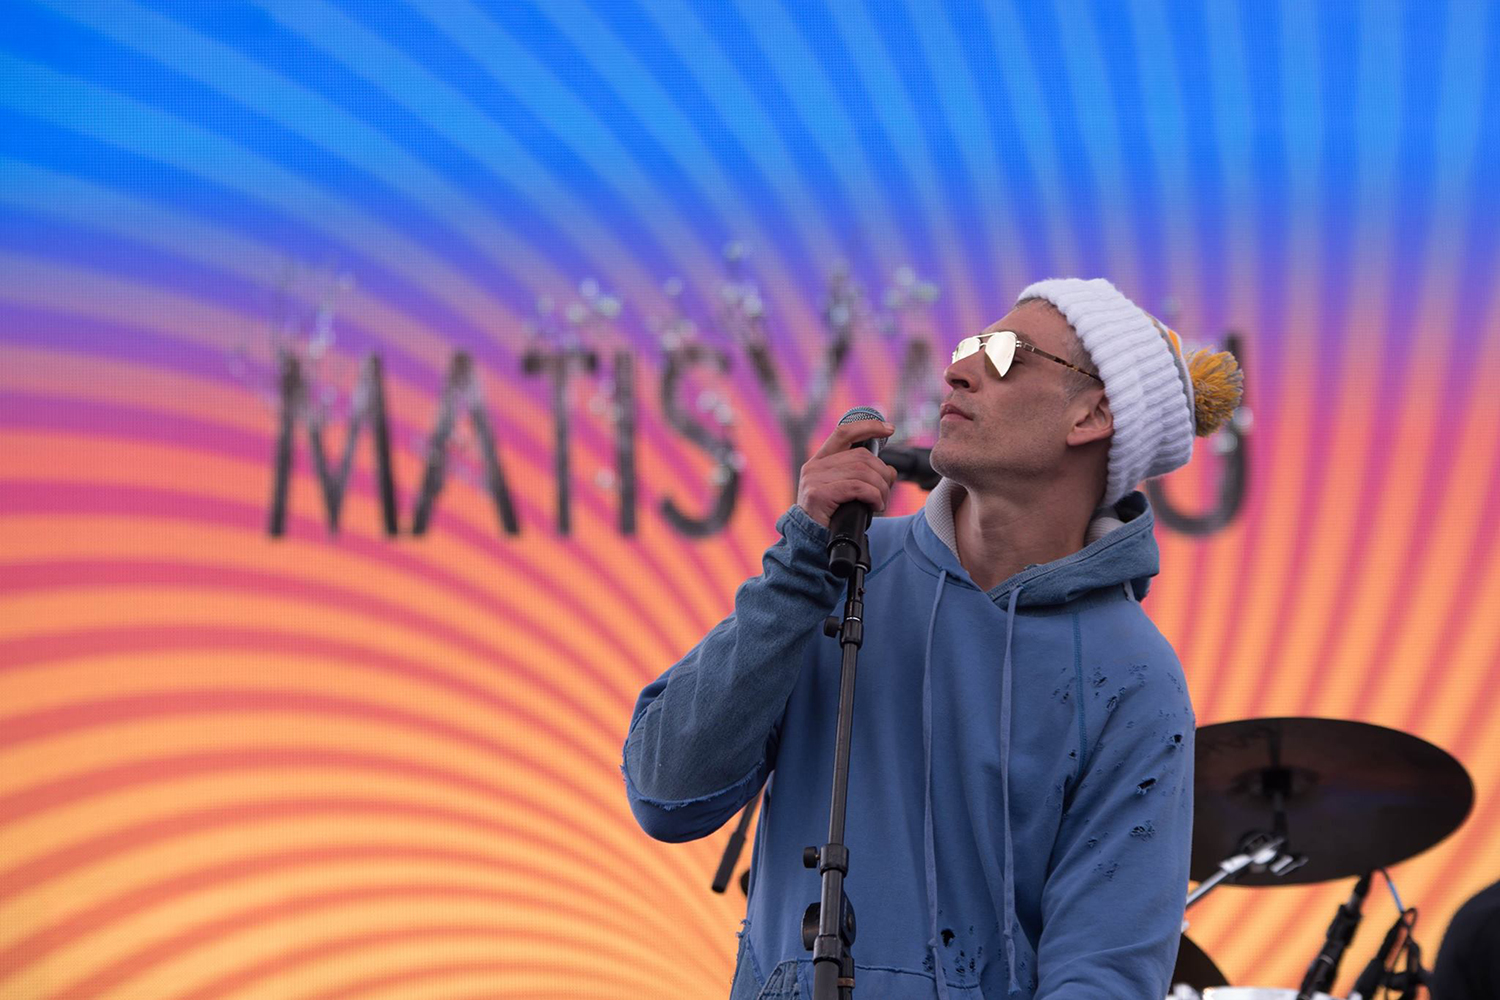 Matisyahu performing on stage